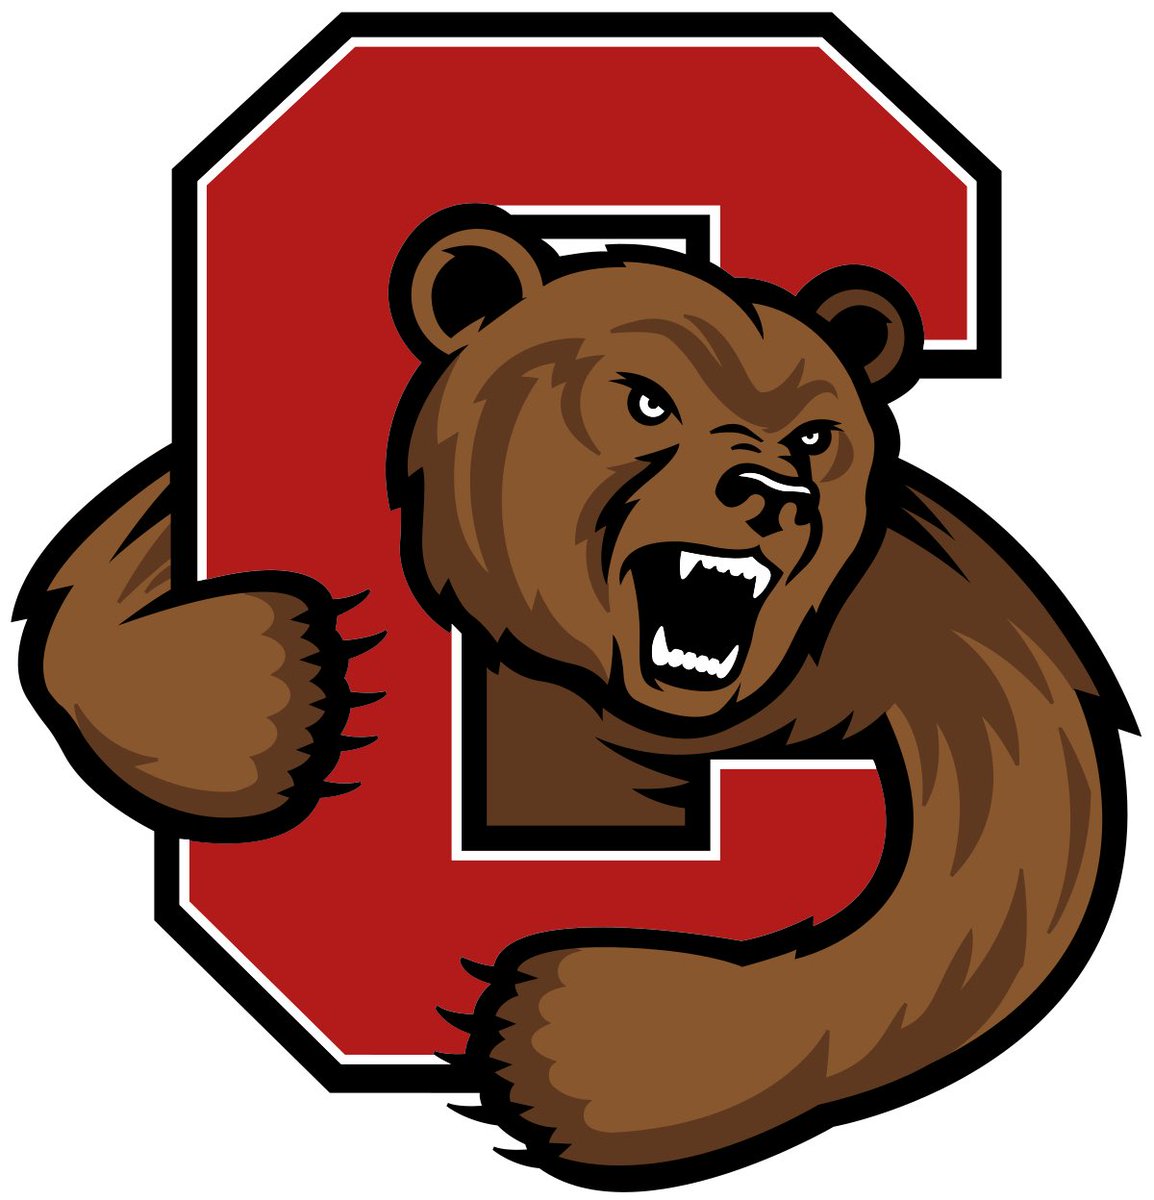 Wow! After a great conversation with @CoachBhakta I’m blessed to receive an offer from Cornell University.@TEP5252 @Coach_Hill2 @TFloss32 @RHS_FBRecruits @FootballReedy @BLagrone @dctf @CoachSecord @Cornell